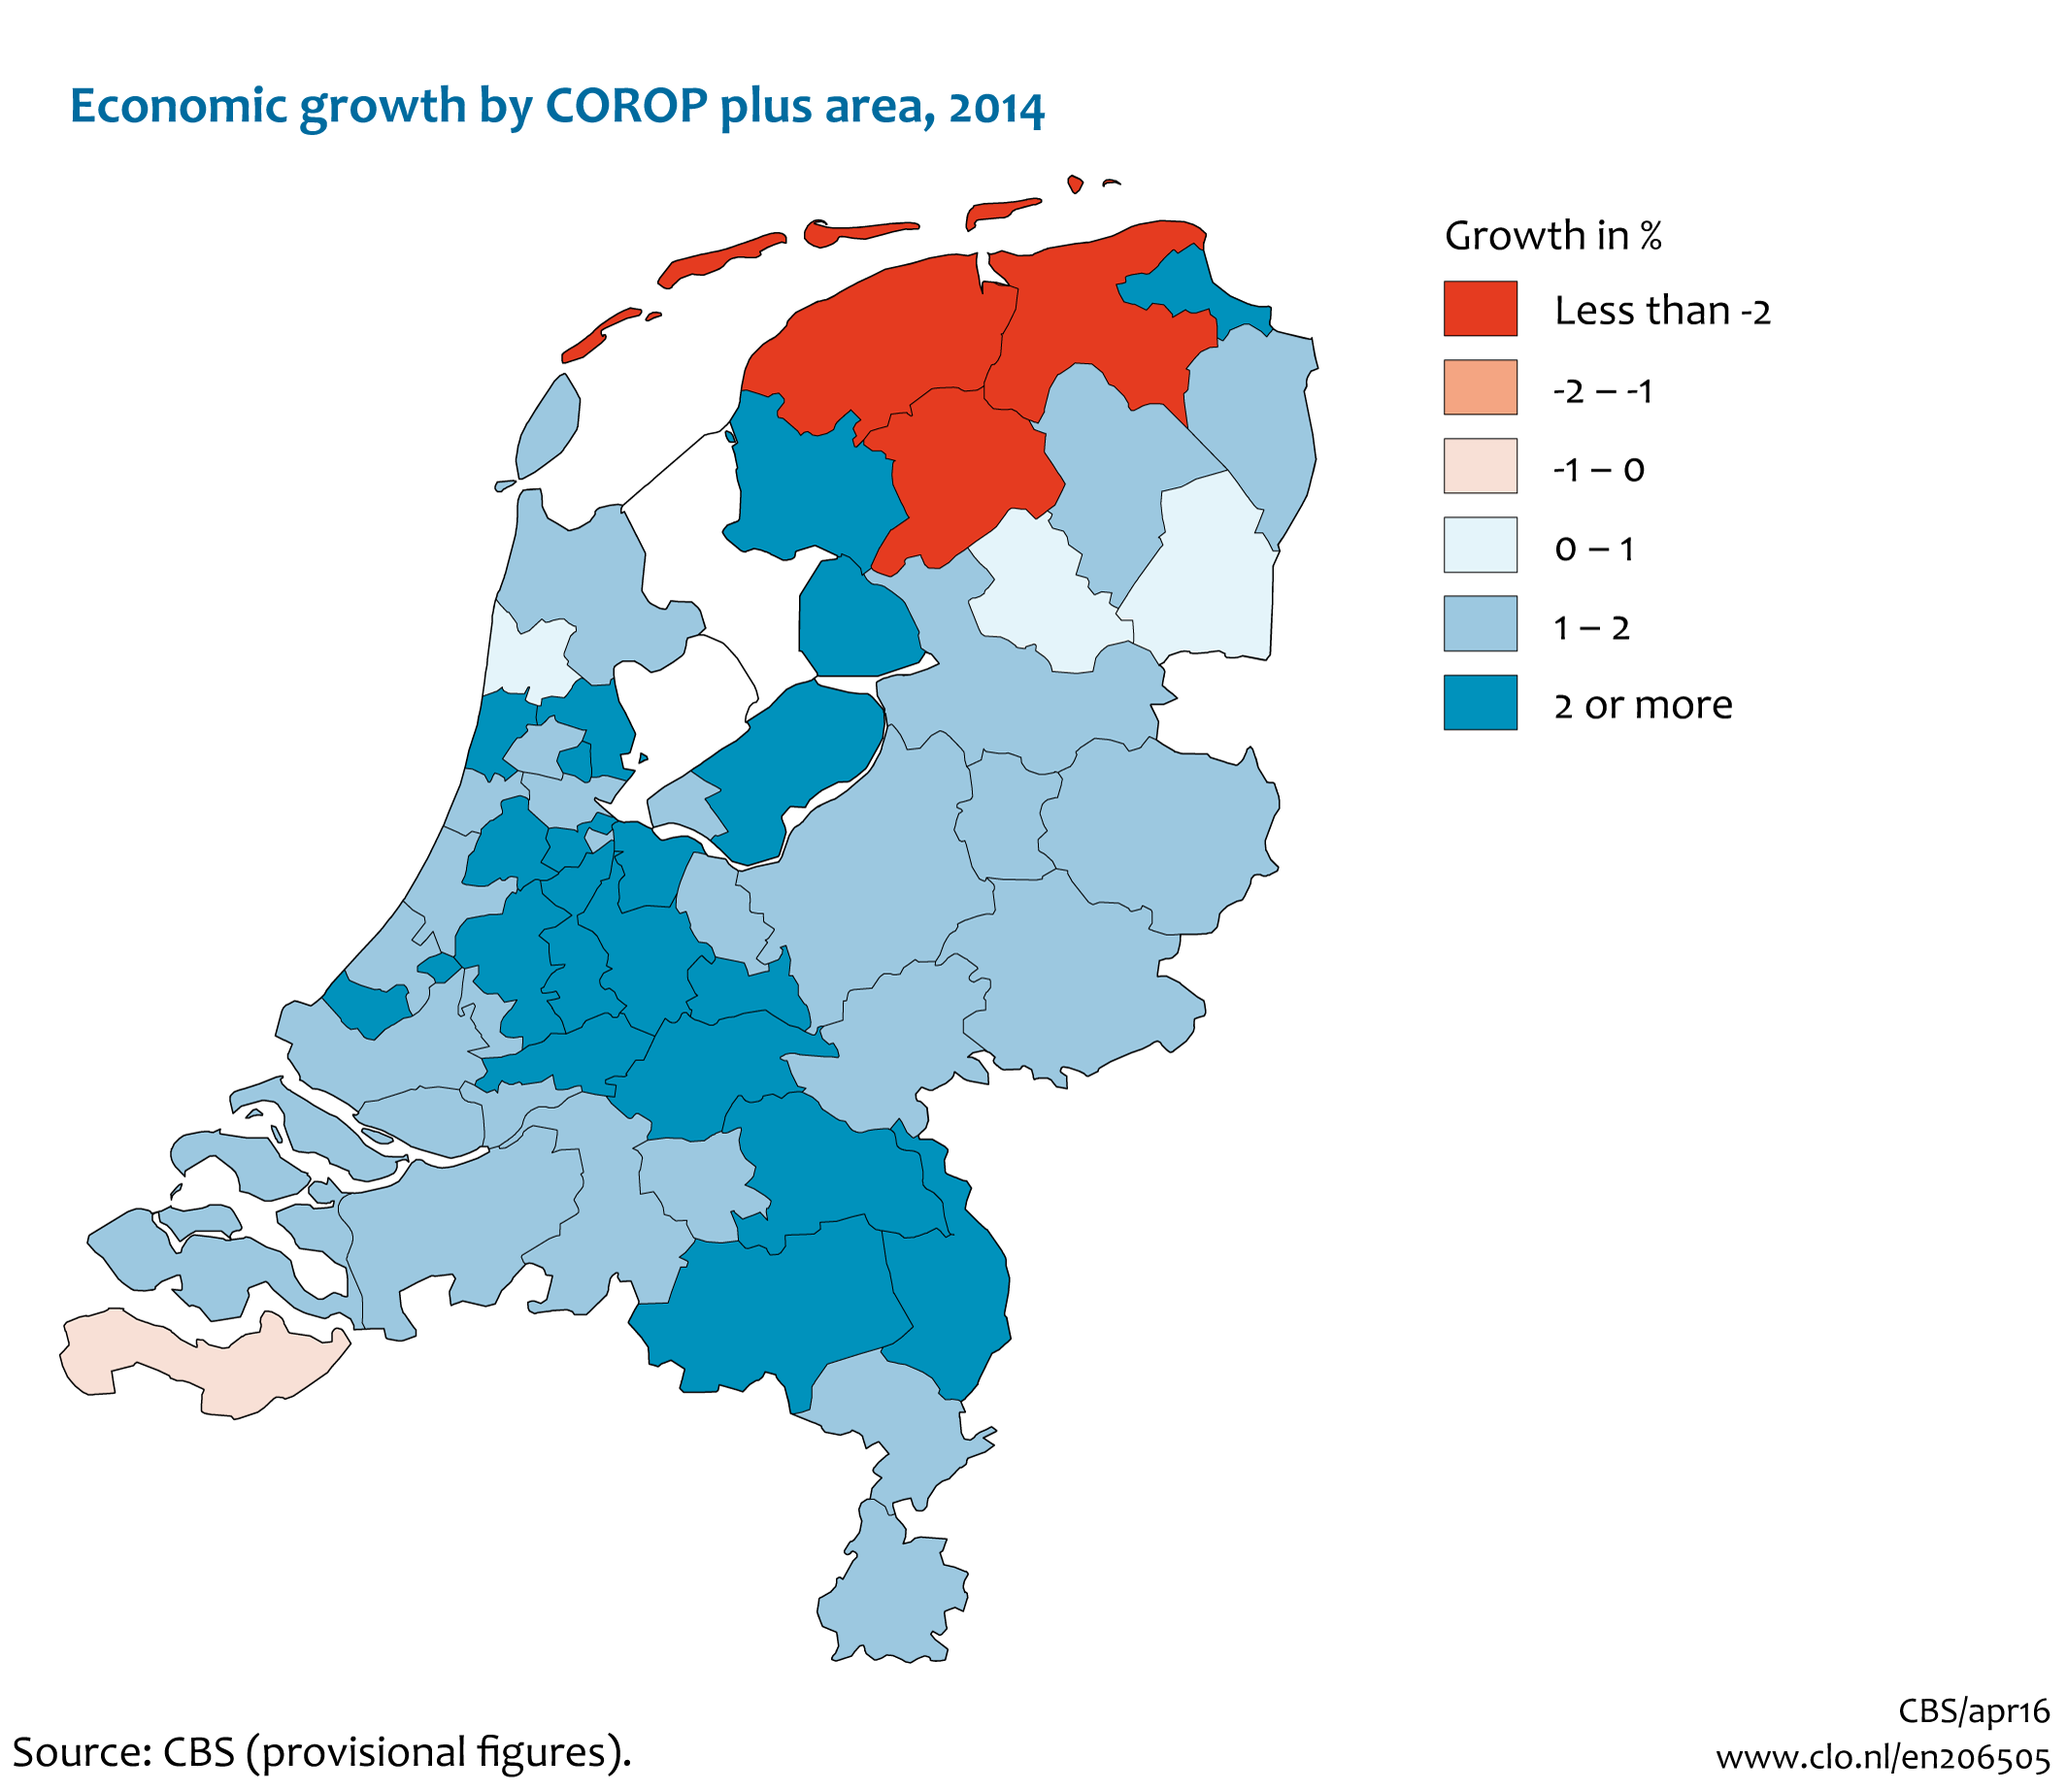 Image  Economic growth by COROP plus area, 2014. The image is further explained in the text.